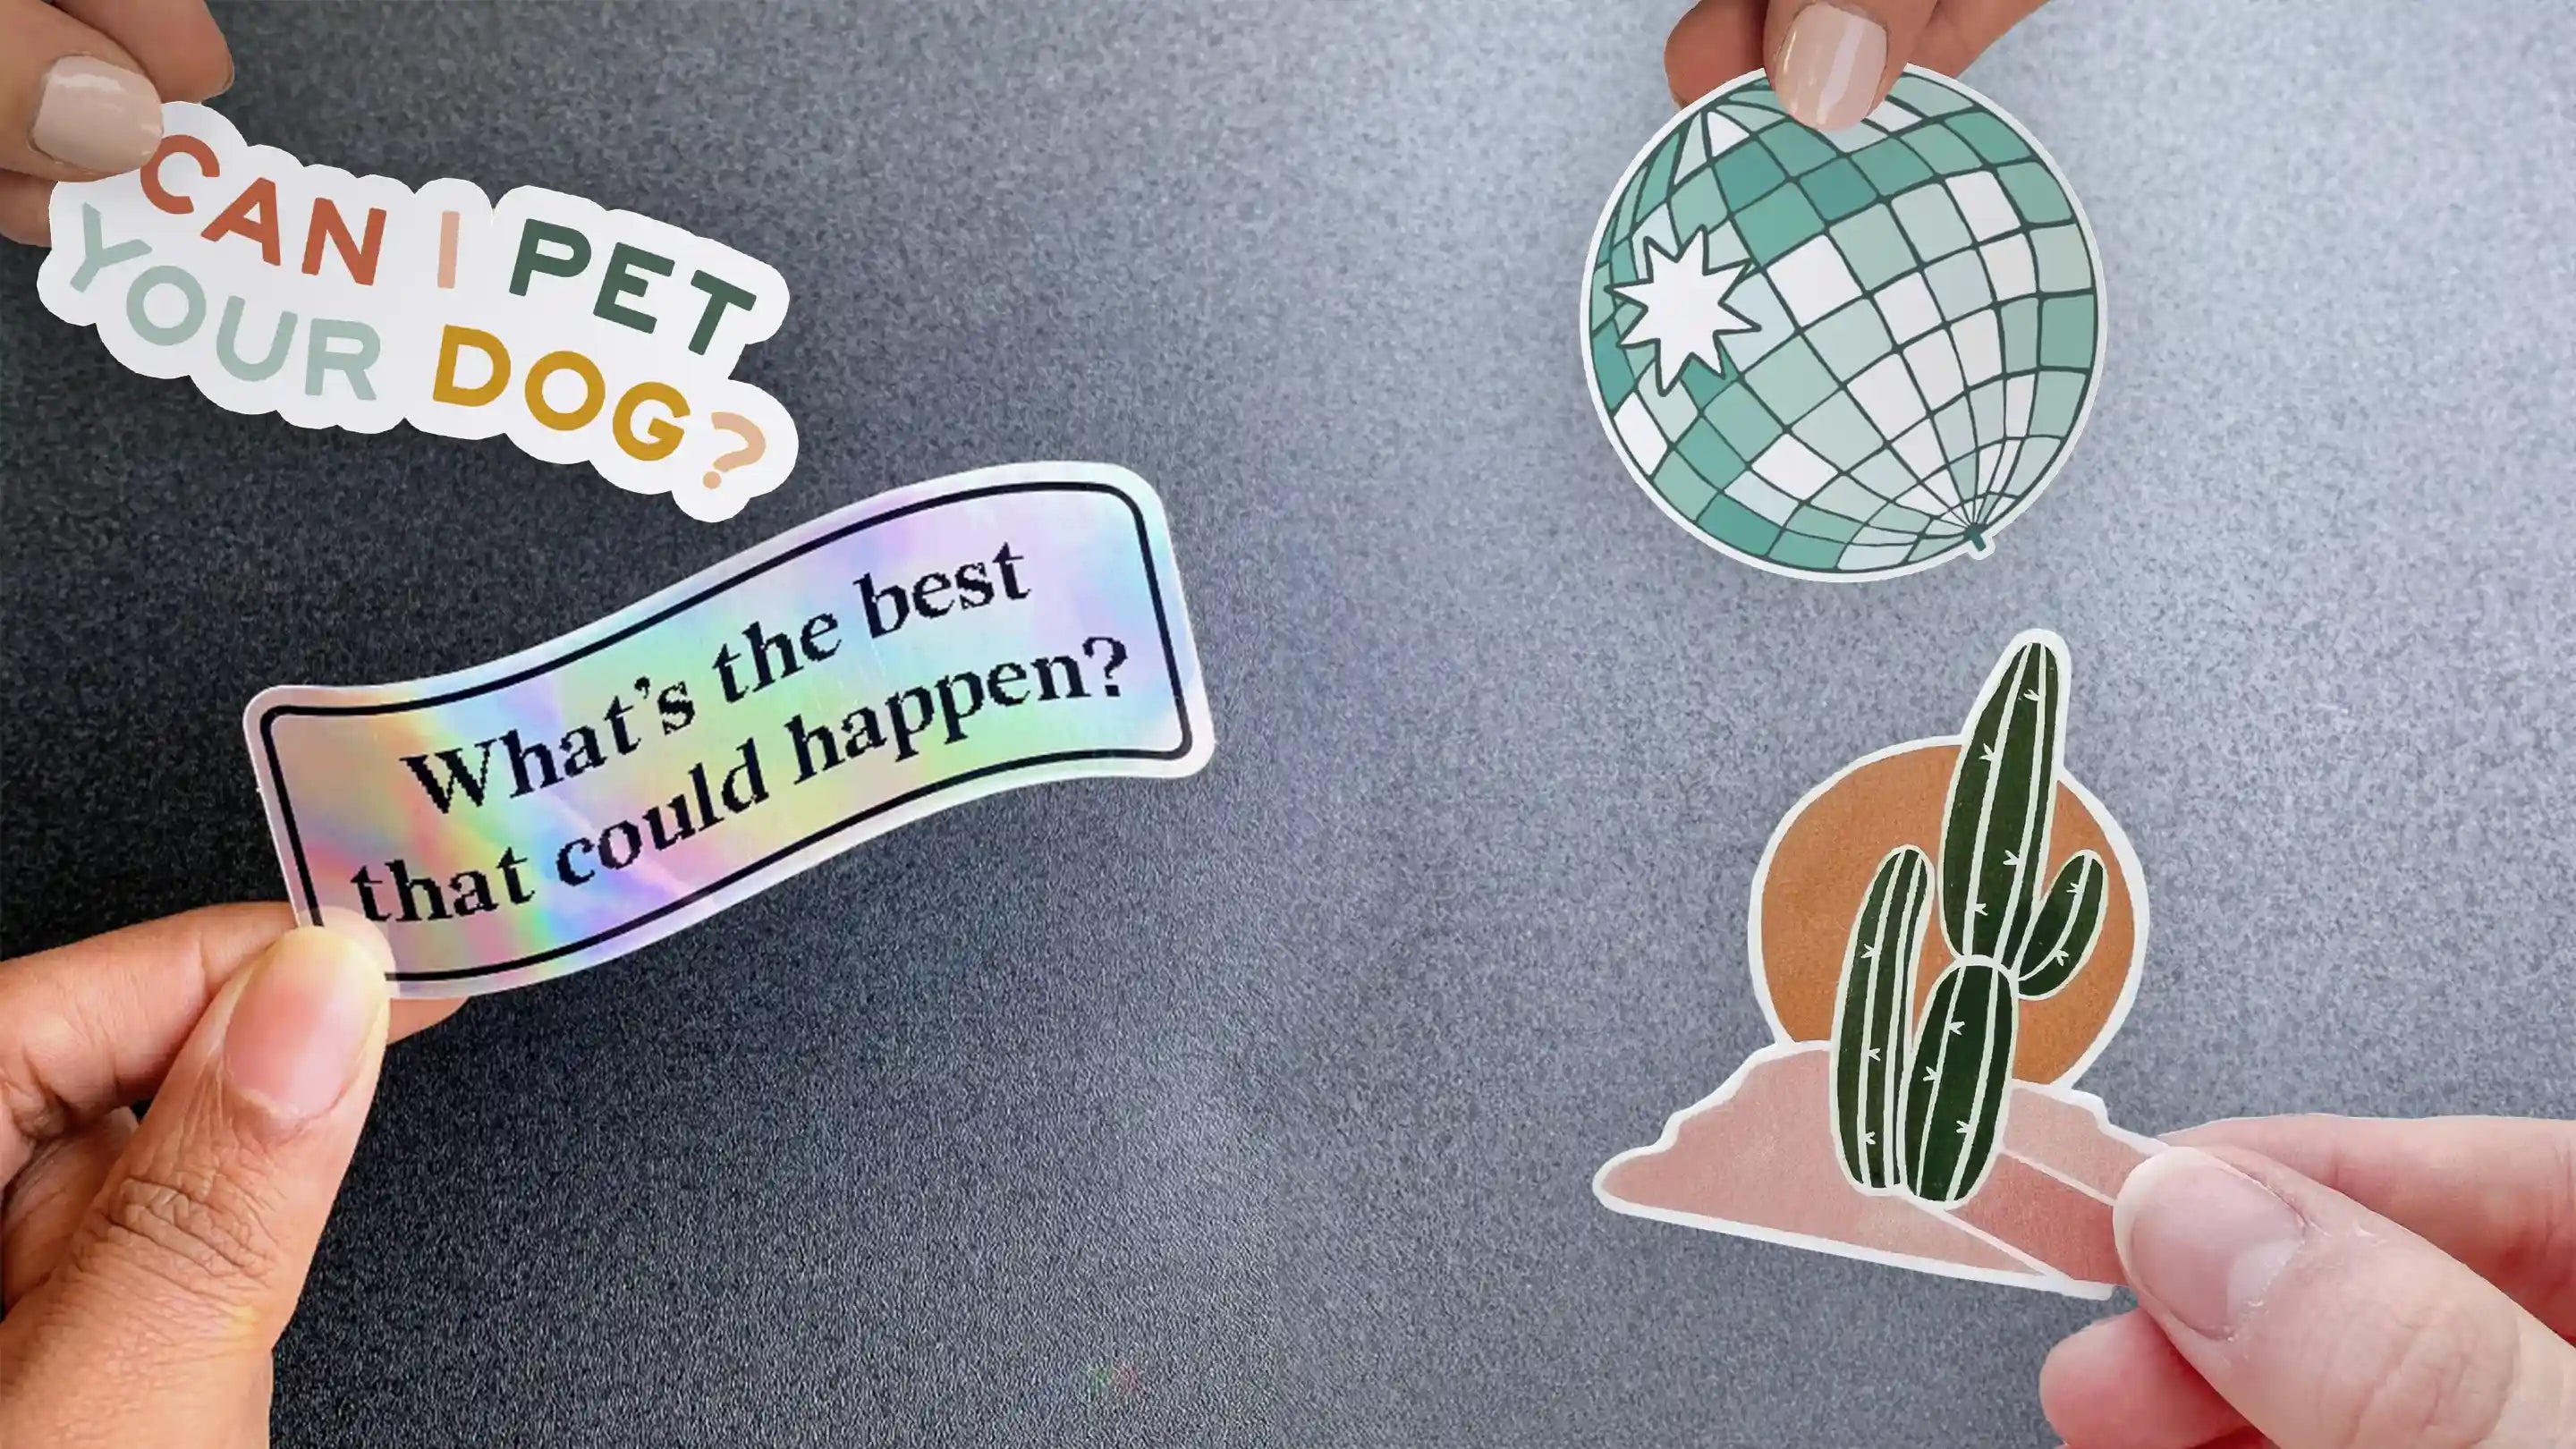 Multiple hands holding stickers. One sticker says "Whats the best that could happen?" One sticker says "Can I pet your dog?" One sticker is a disco ball. One sticker is a cactus